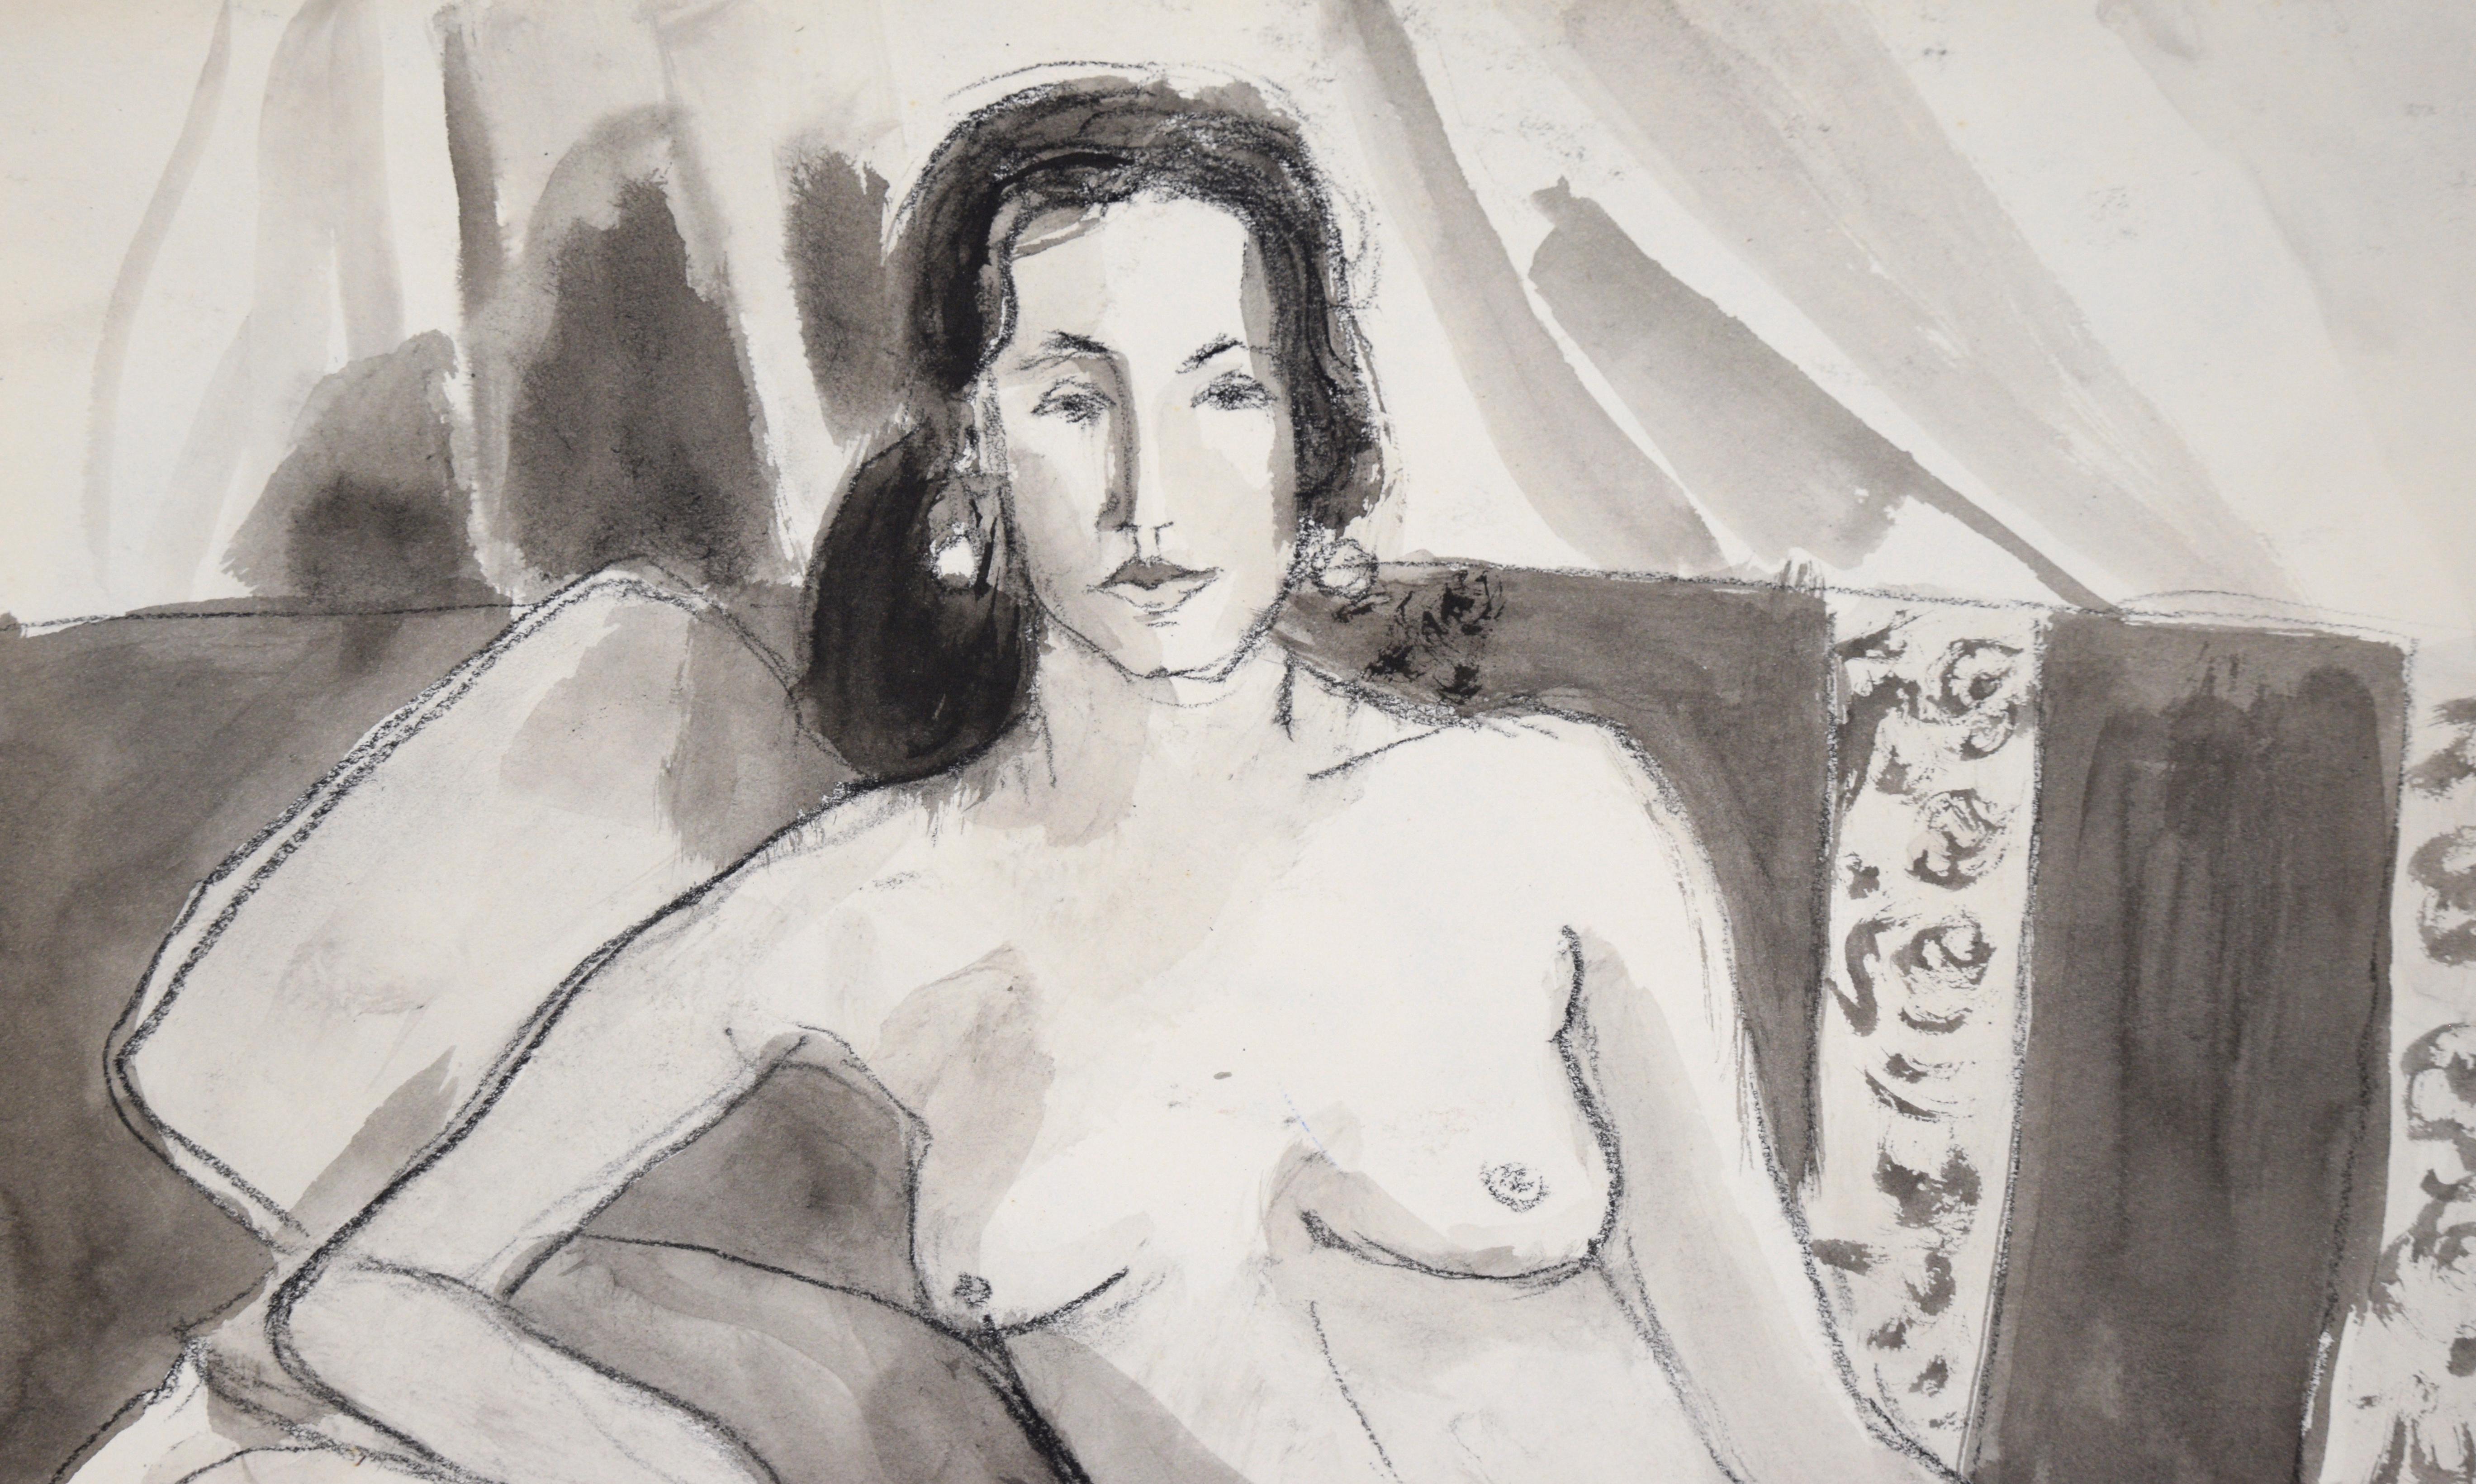 Nude Woman on Striped Chair #2 in Charcoal and Gouache on Paper - Painting by Katherine Kallick